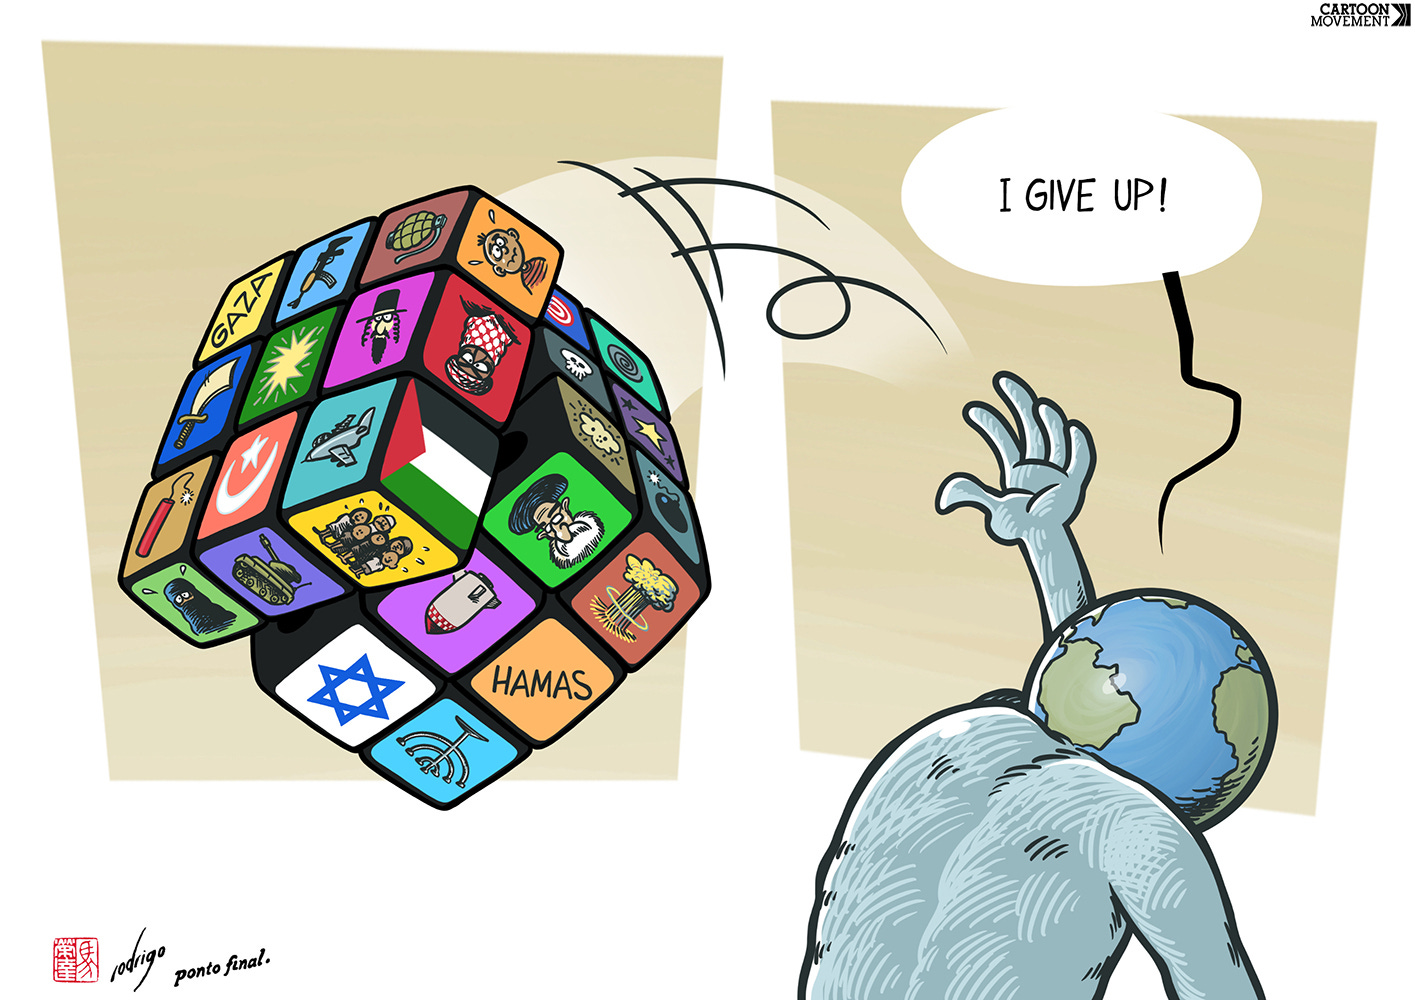 Cartoon showing a desperate person with the earth as its head, throwing a Rubik's cube over his shoulder and saying "I give up!" Instead of just colours, the facets of the Rubik's cube show the many different elements of the conflict between Palestine and Israel.